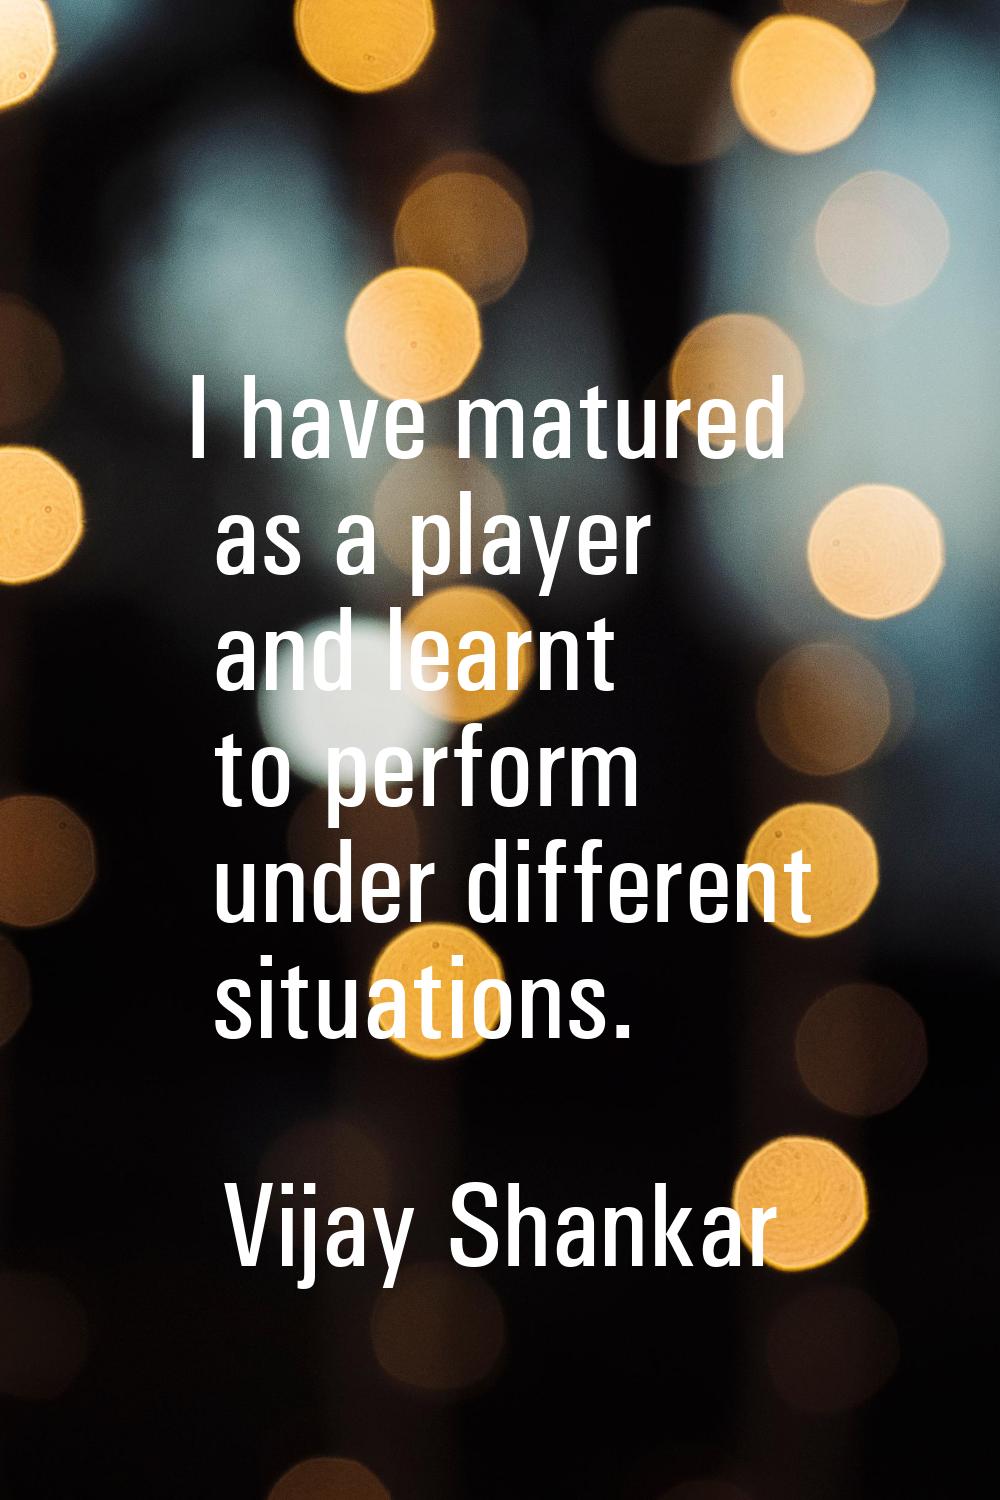 I have matured as a player and learnt to perform under different situations.